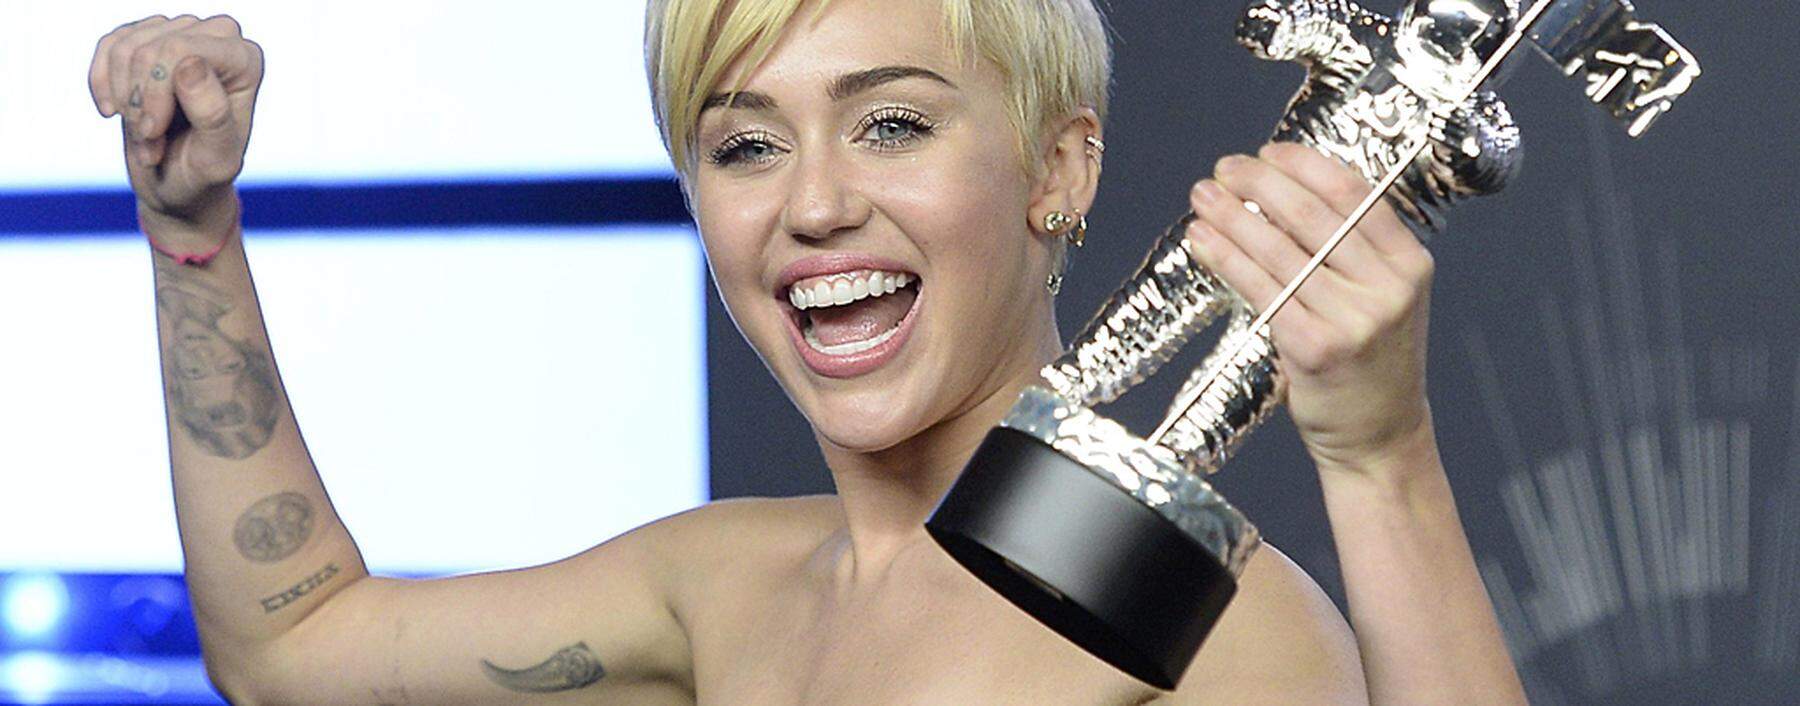 Singer Miley Cyrus poses backstage after winning Video of the Year for ´Wrecking Ball´ during the 2014 MTV Video Music Awards in Inglewood